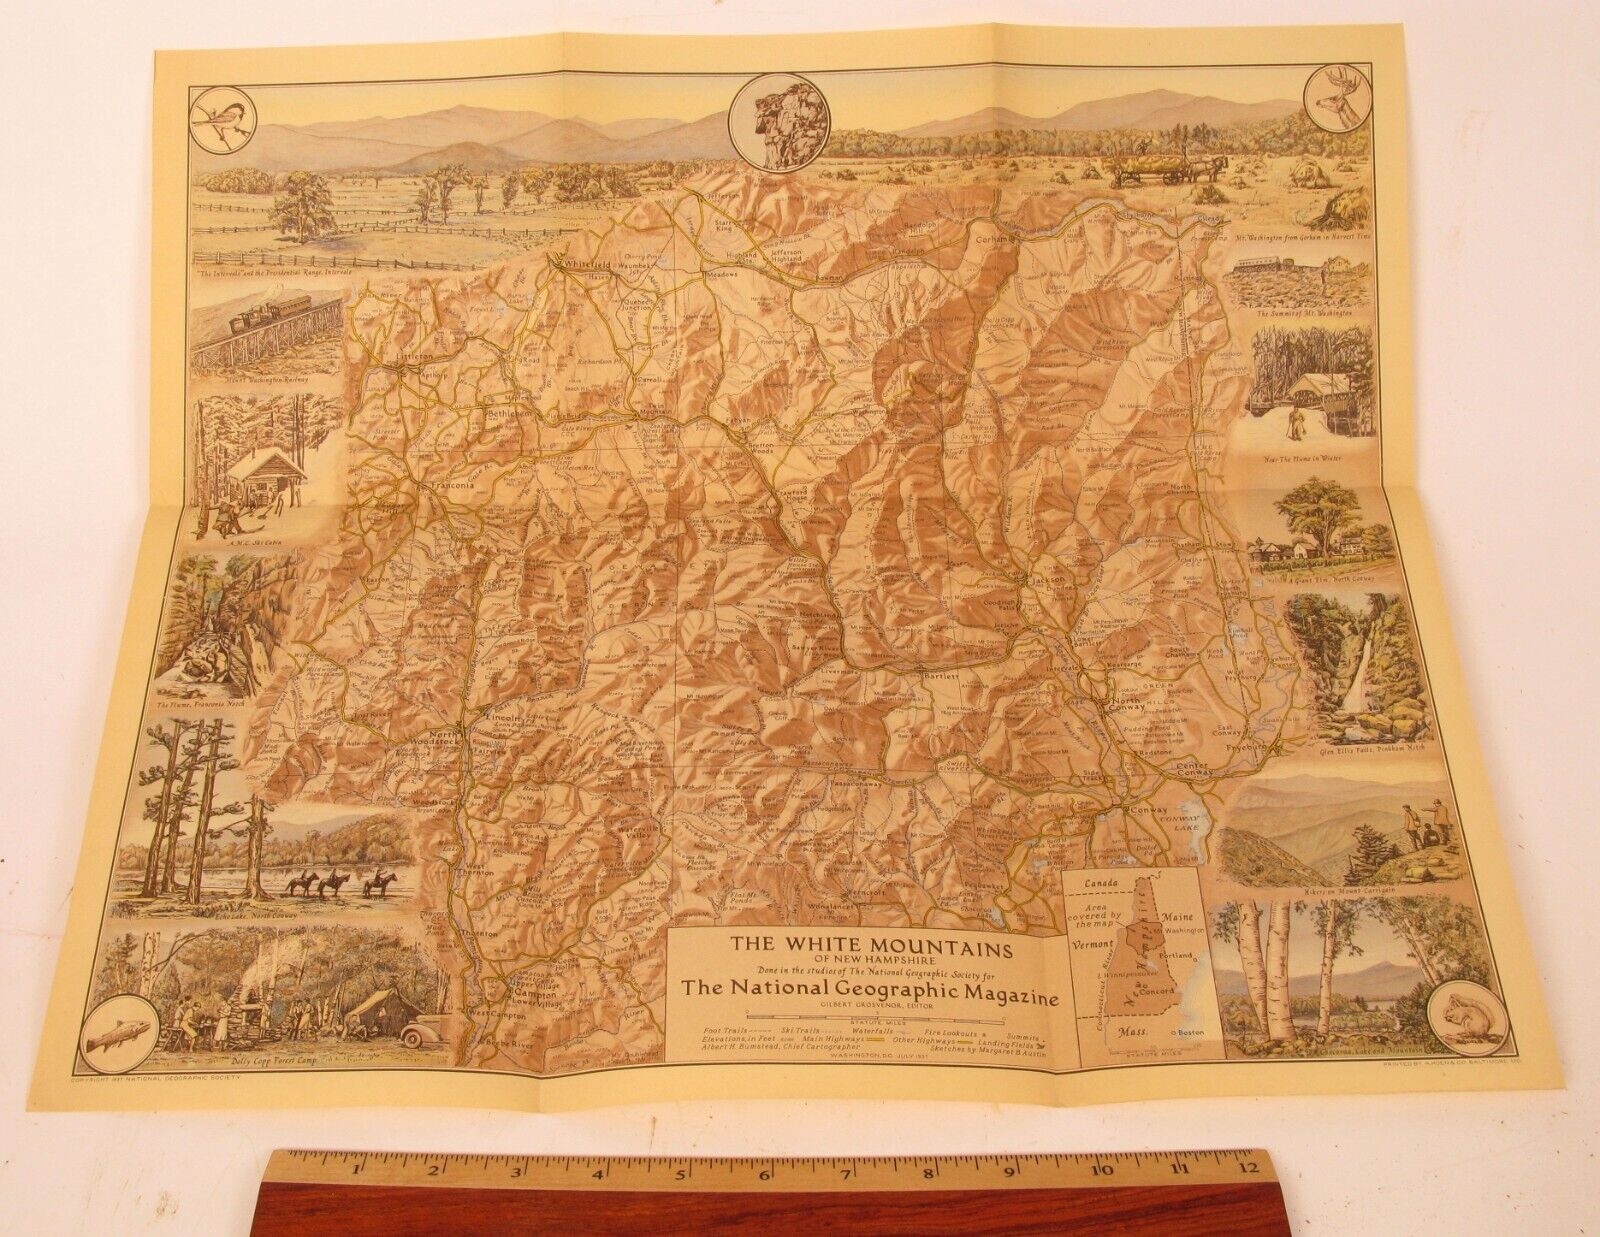 1937 WHITE MOUNTAINS OLD MAN OF THE MOUNTAIN  NATIONAL GEOGRAPHIC MAGAZINE MAP 